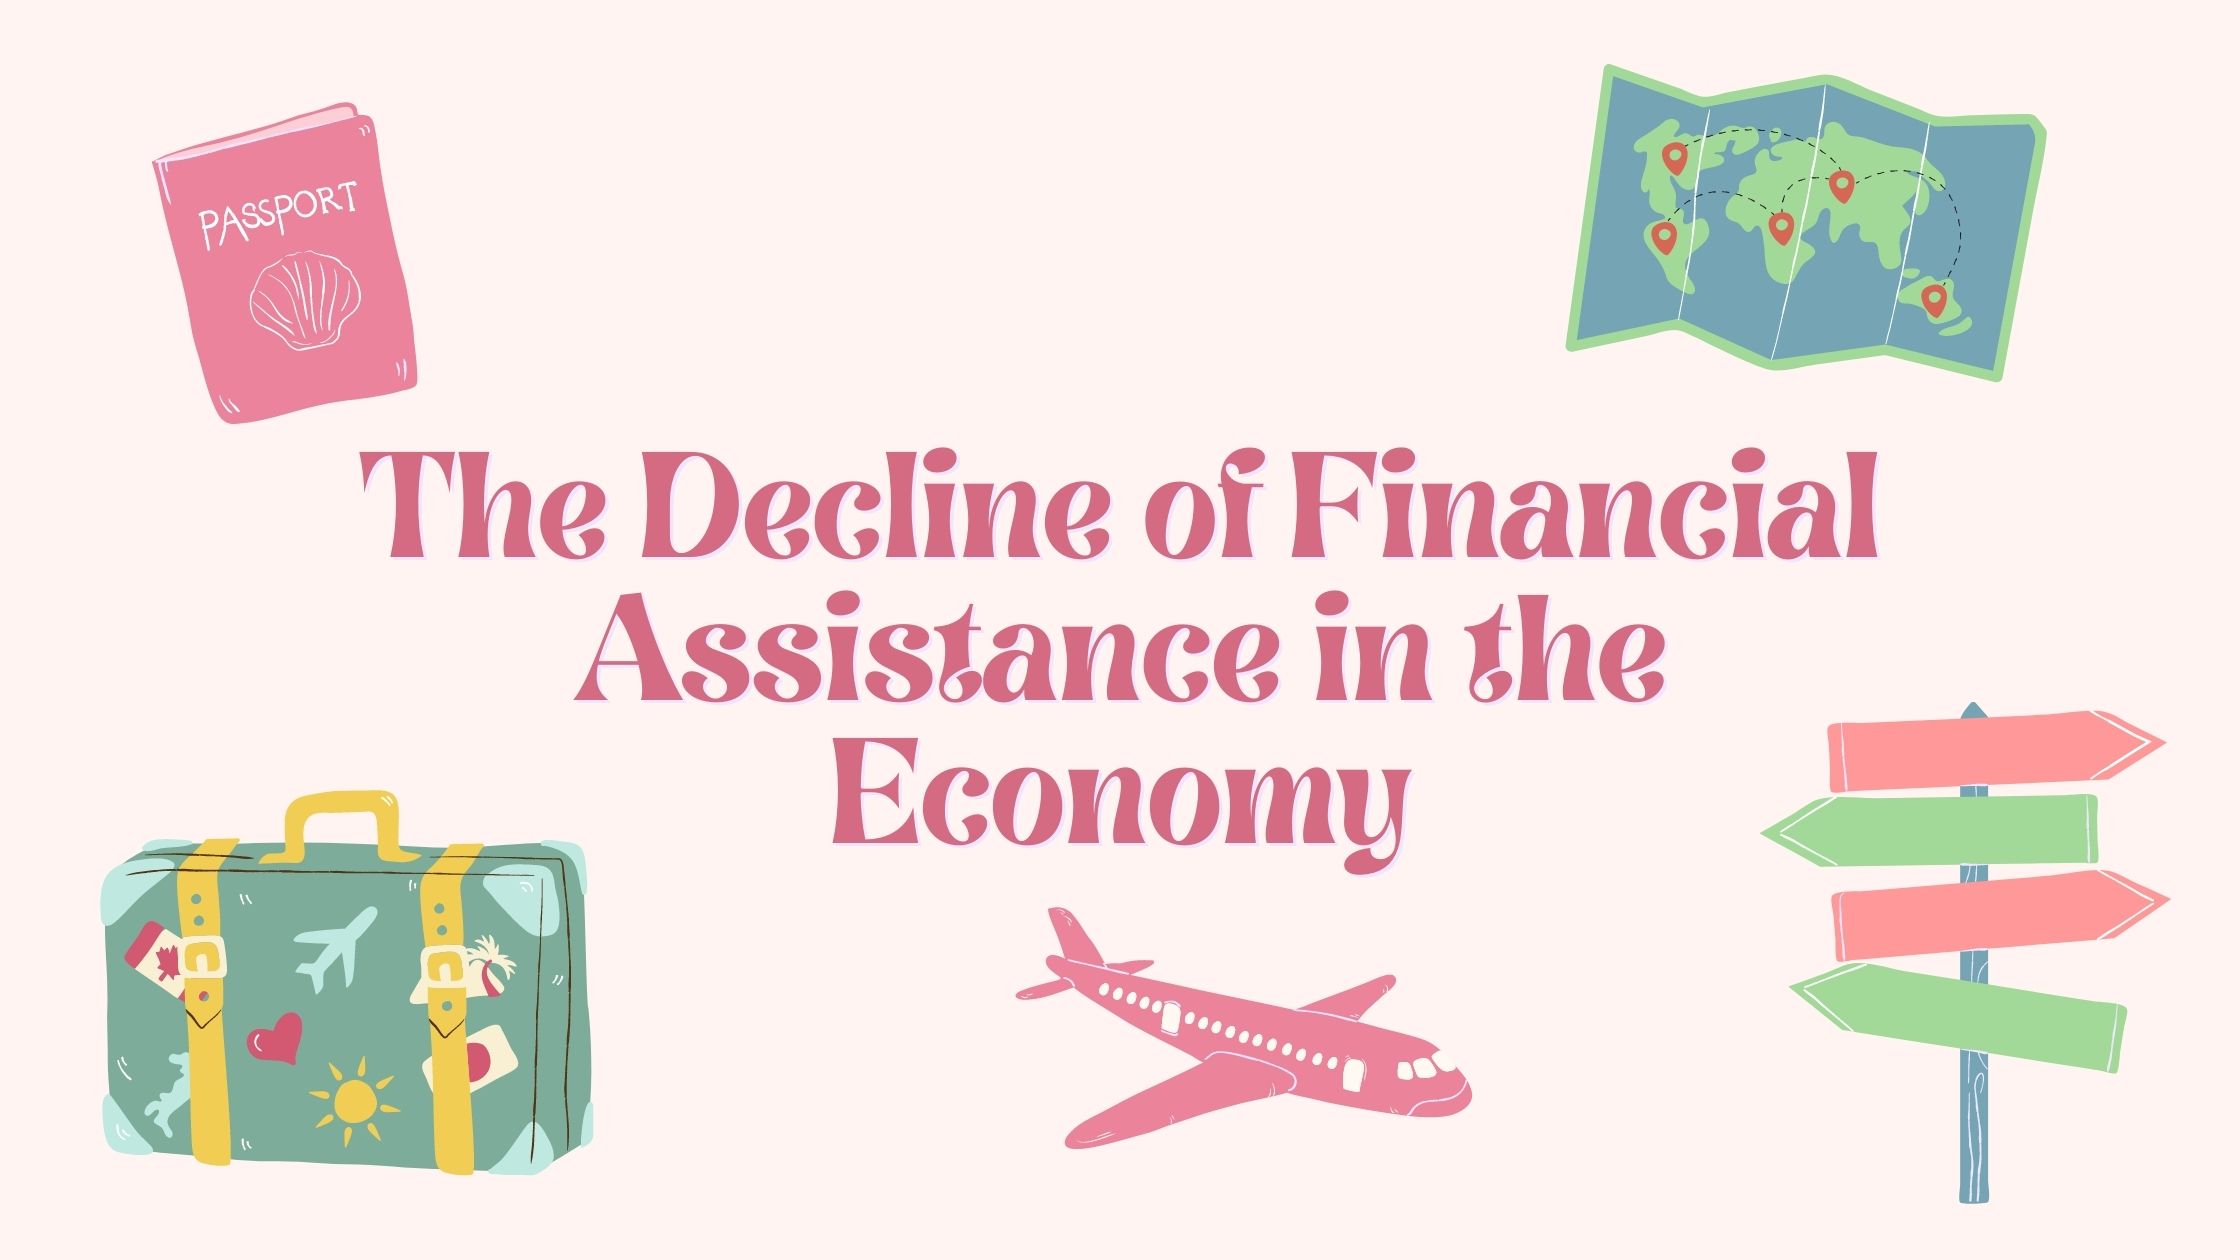 The Decline of Financial Assistance in the Economy